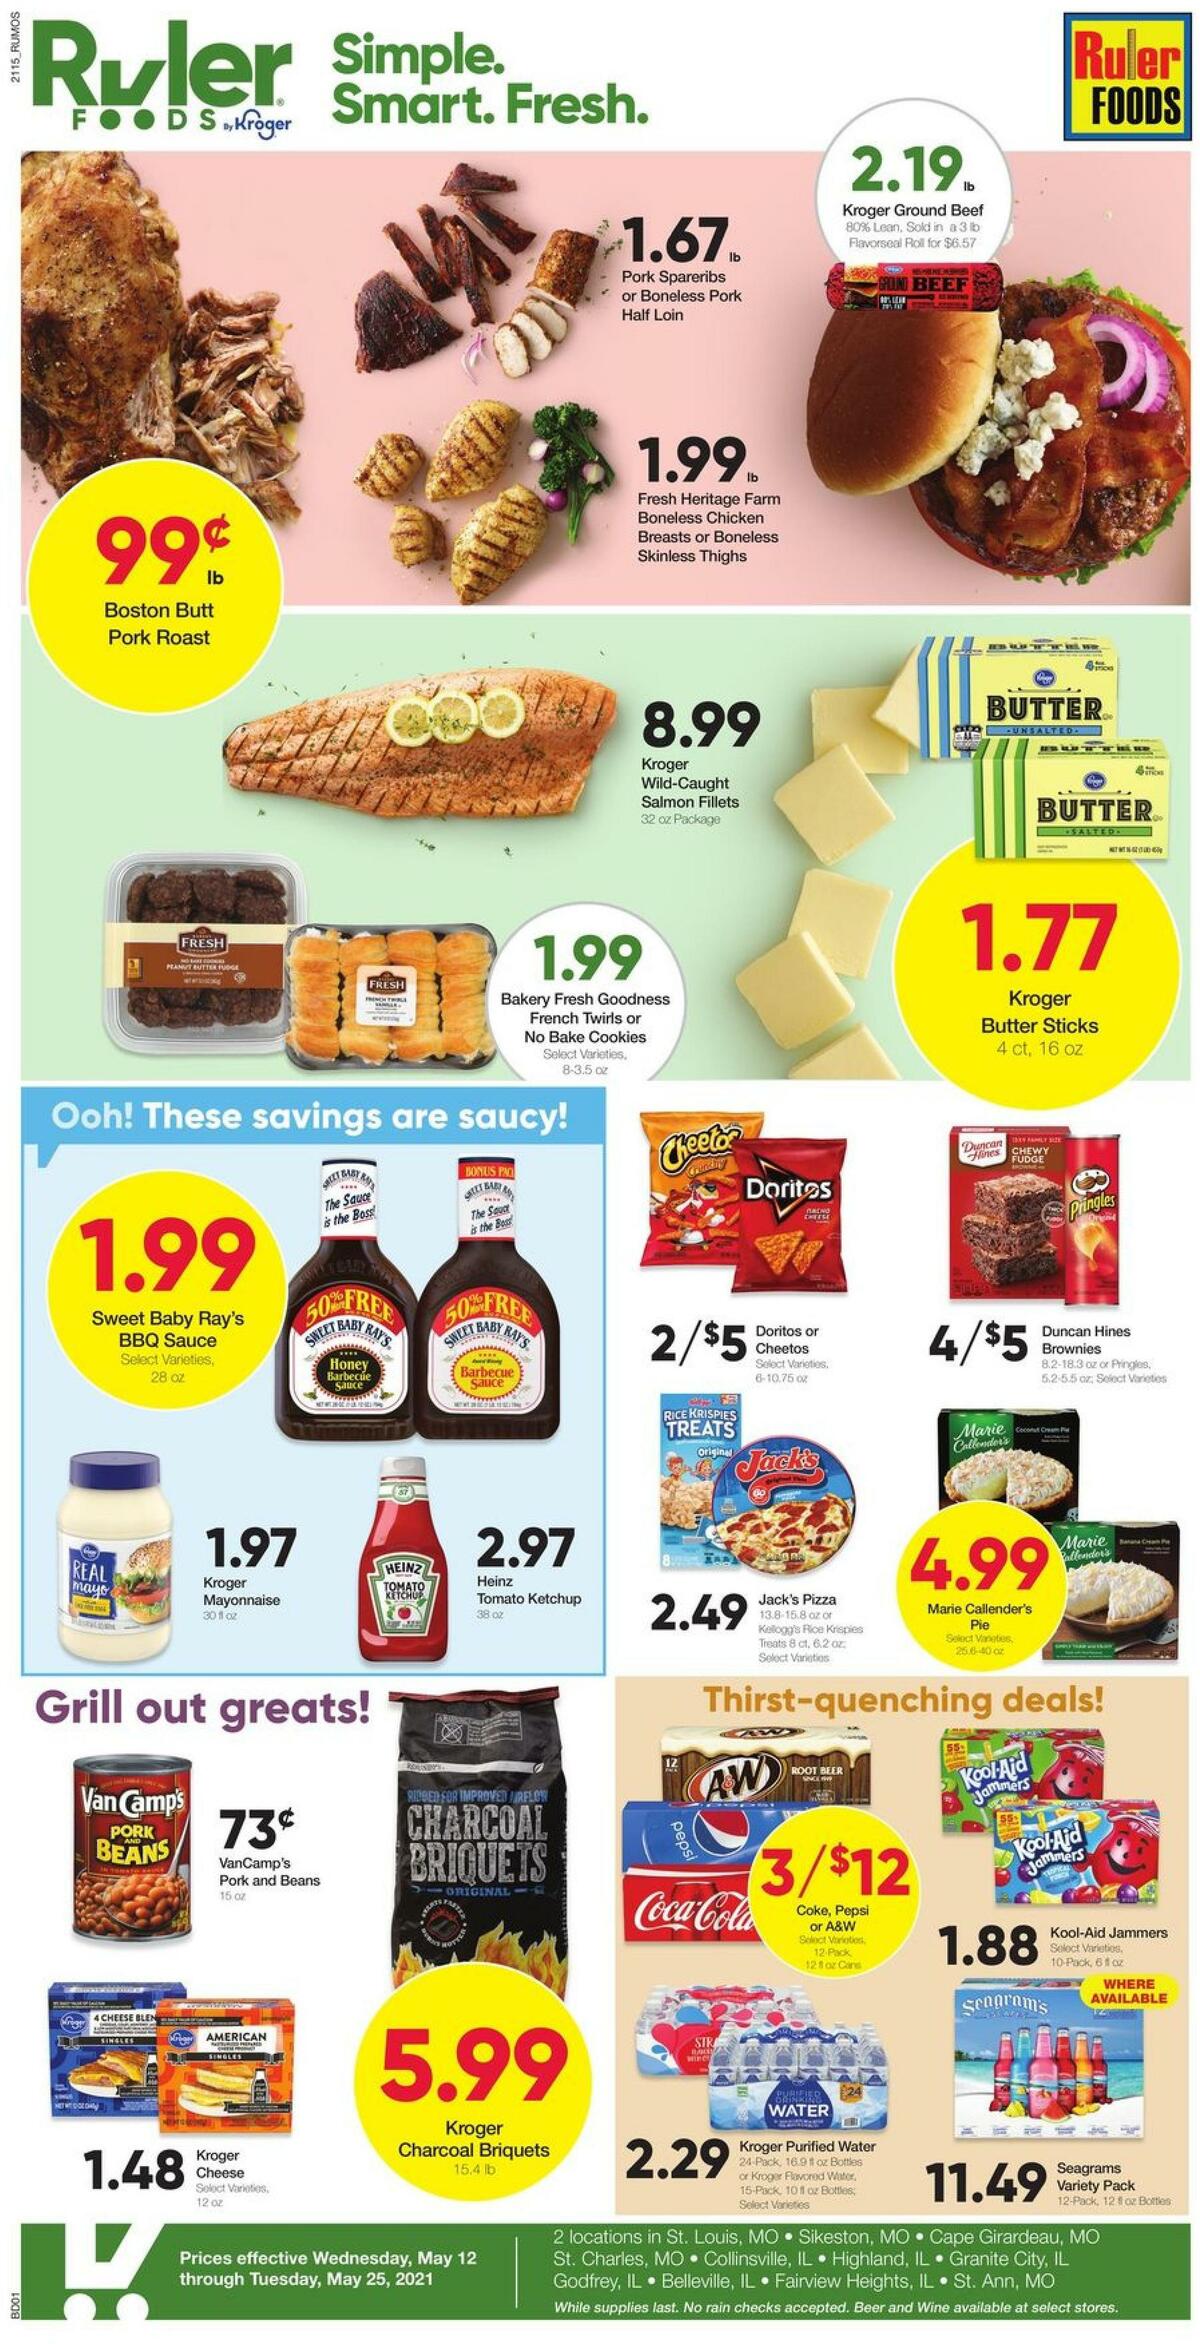 Ruler Foods Weekly Ad from May 12